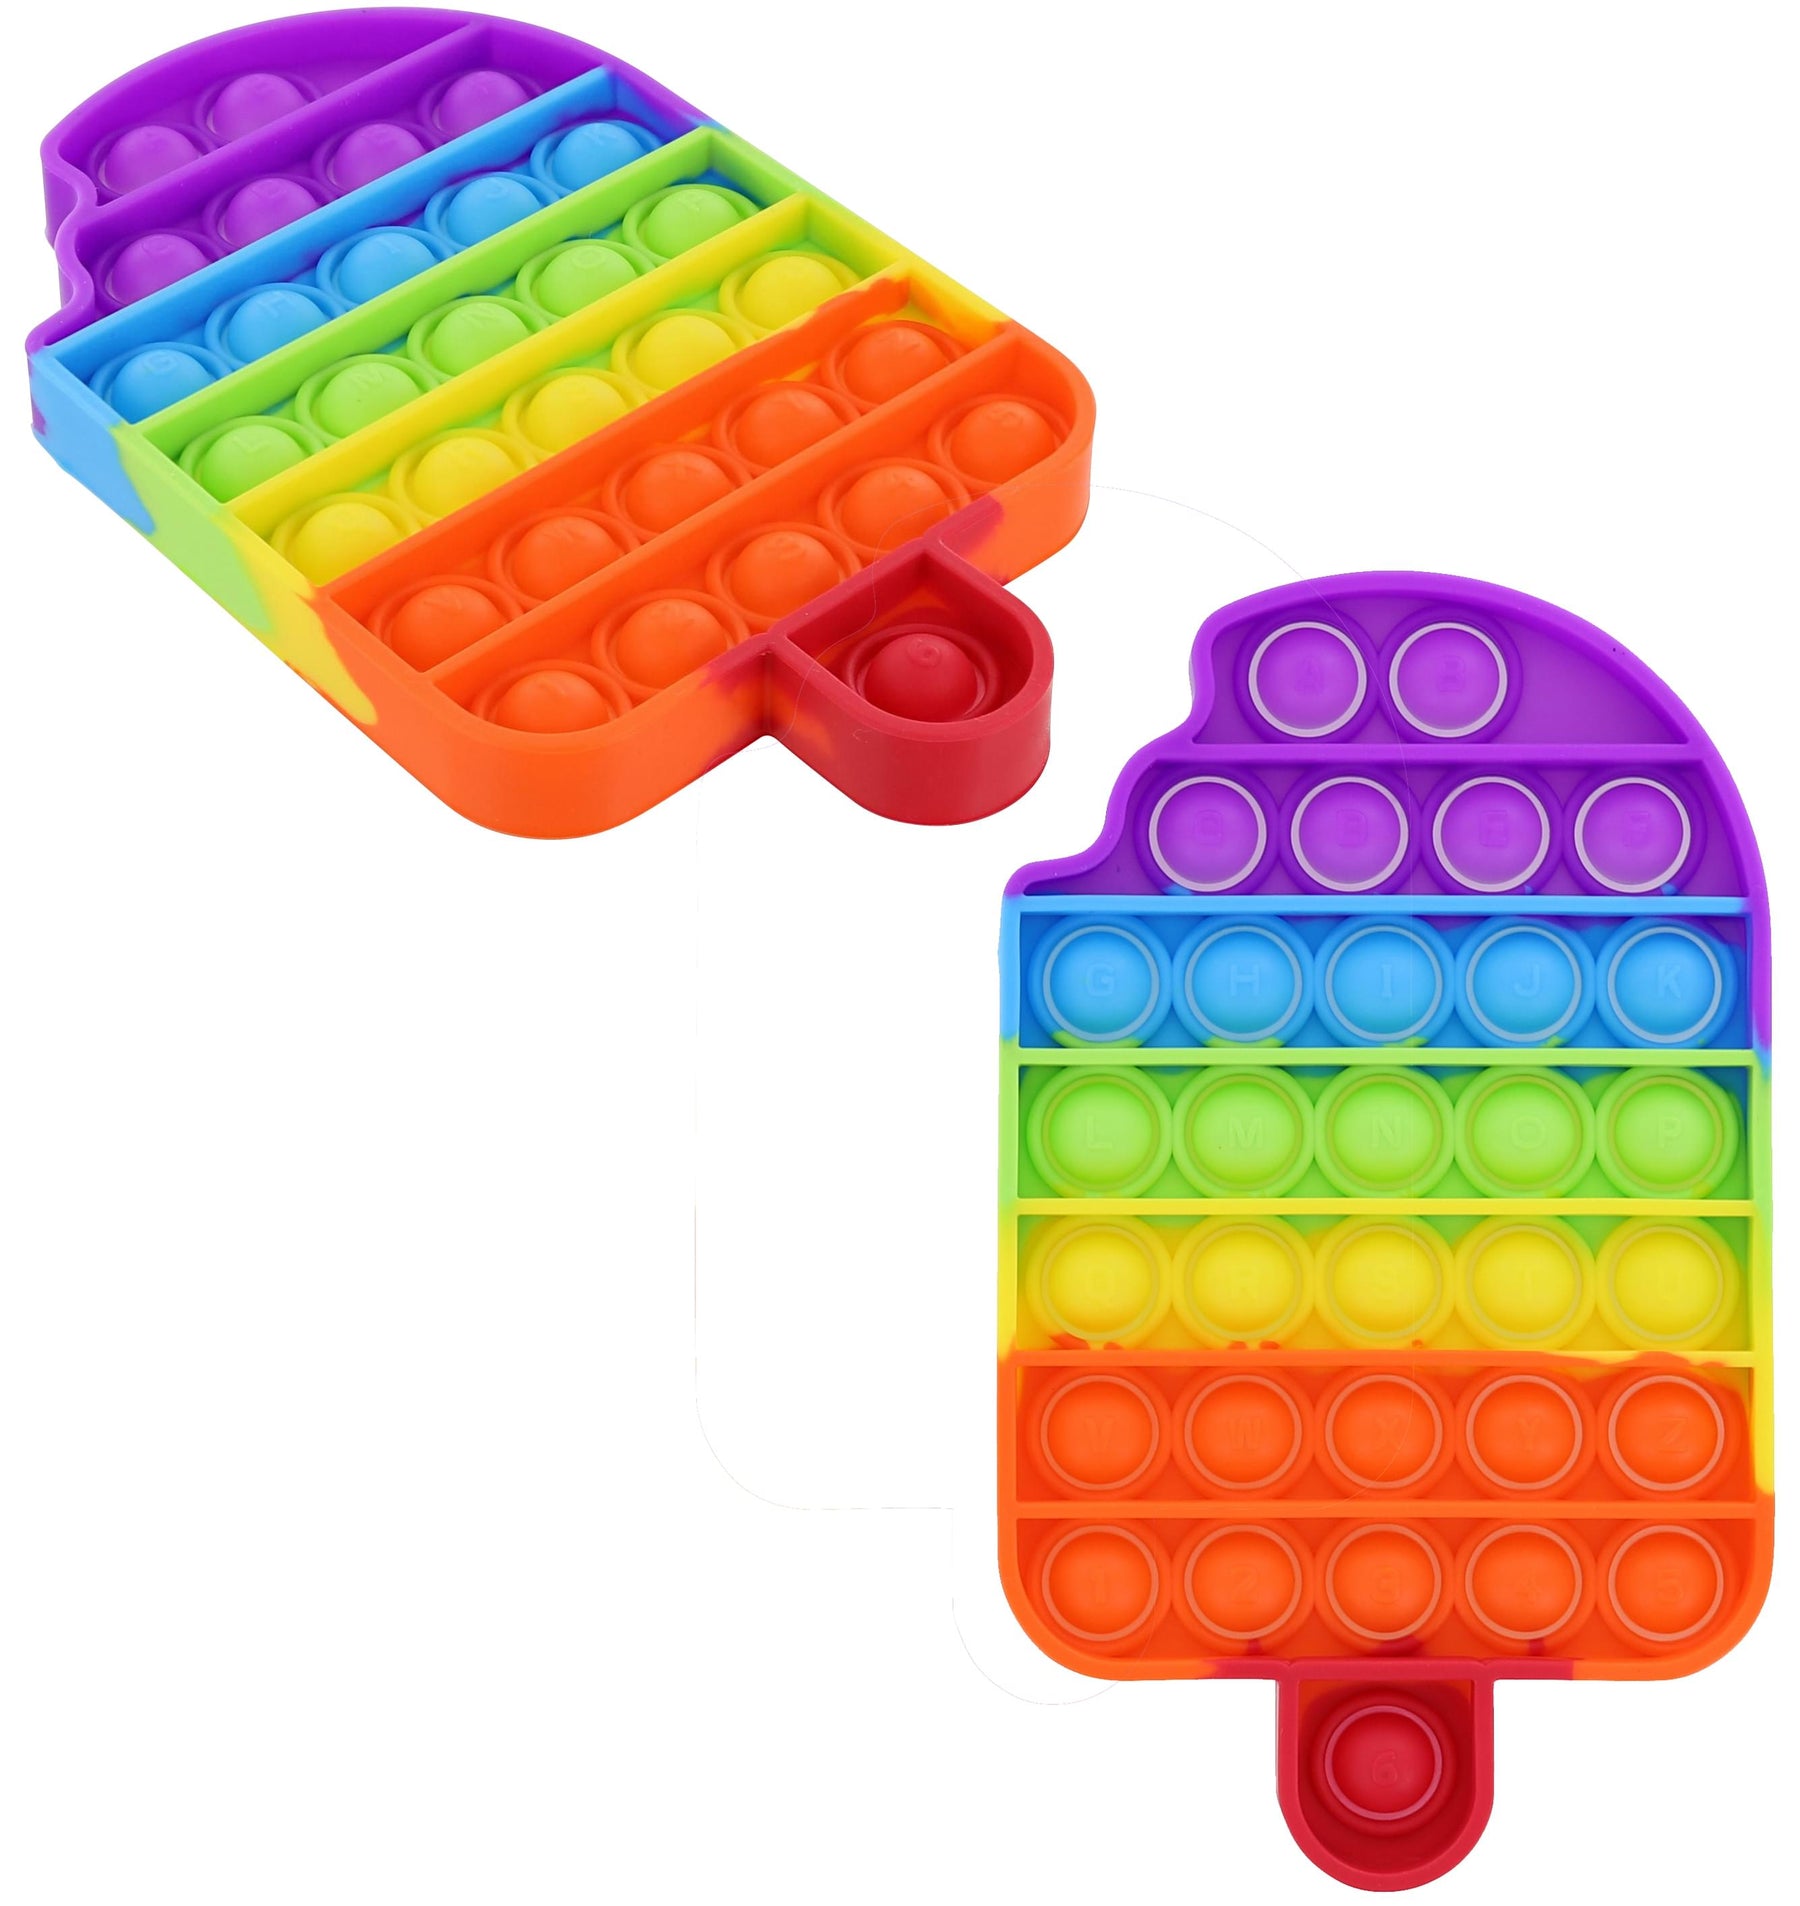 Pop Fidget Toy Rainbow Popsicle 32-Button Silicone Bubble Popping Game